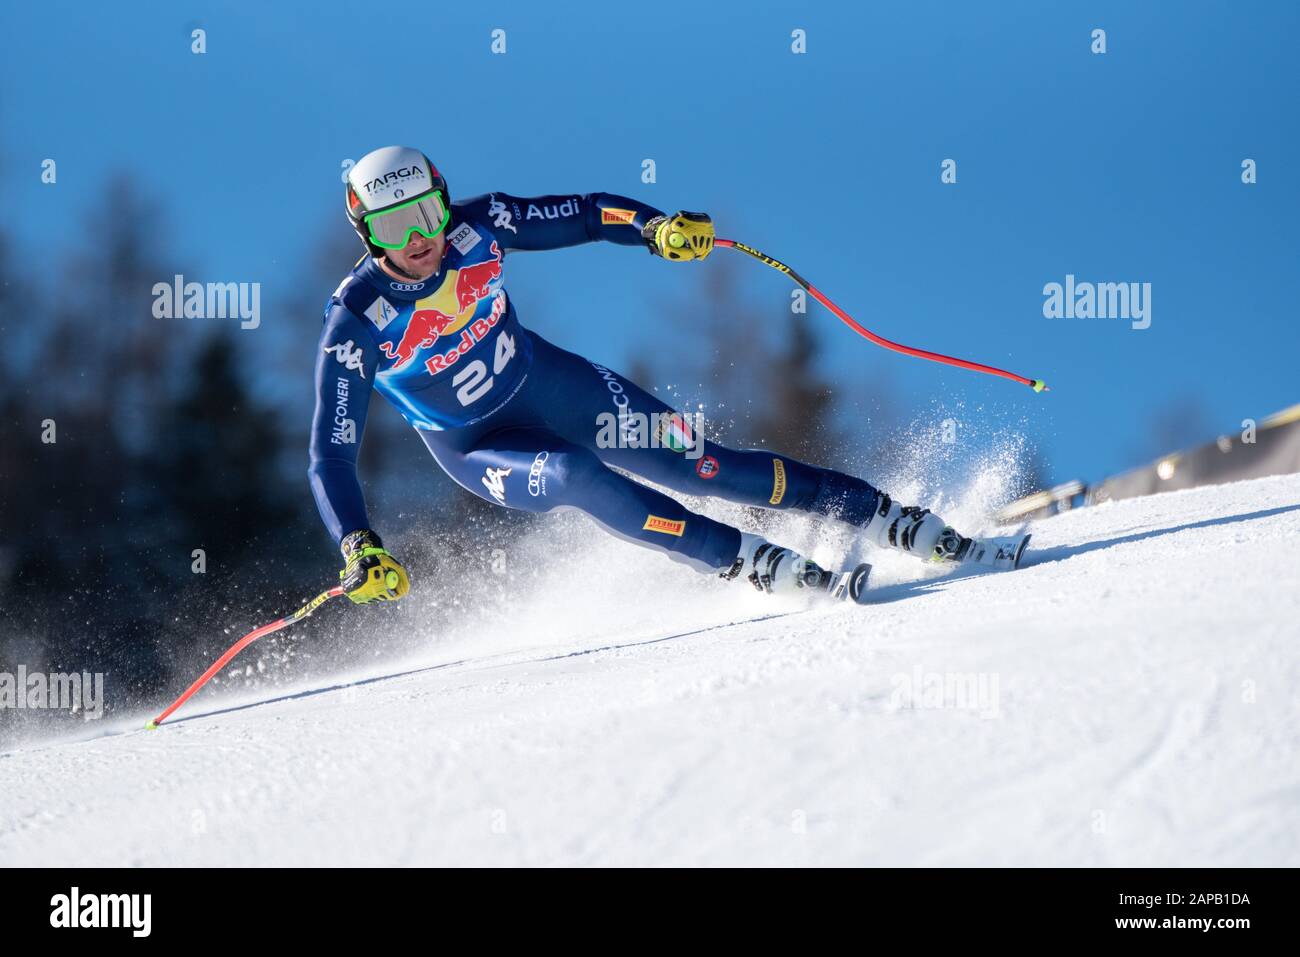 Emanuele Buzzi of Italy at the Ski Alpin: 80. Hahnenkamm Race 2020 - Audi FIS Alpine Ski World Cup - Men's Downhill Training at the Streif on January 22, 2020 in Kitzbuehel, AUSTRIA. (Photo by Horst Ettensberger/ESPA-Images) Stock Photo